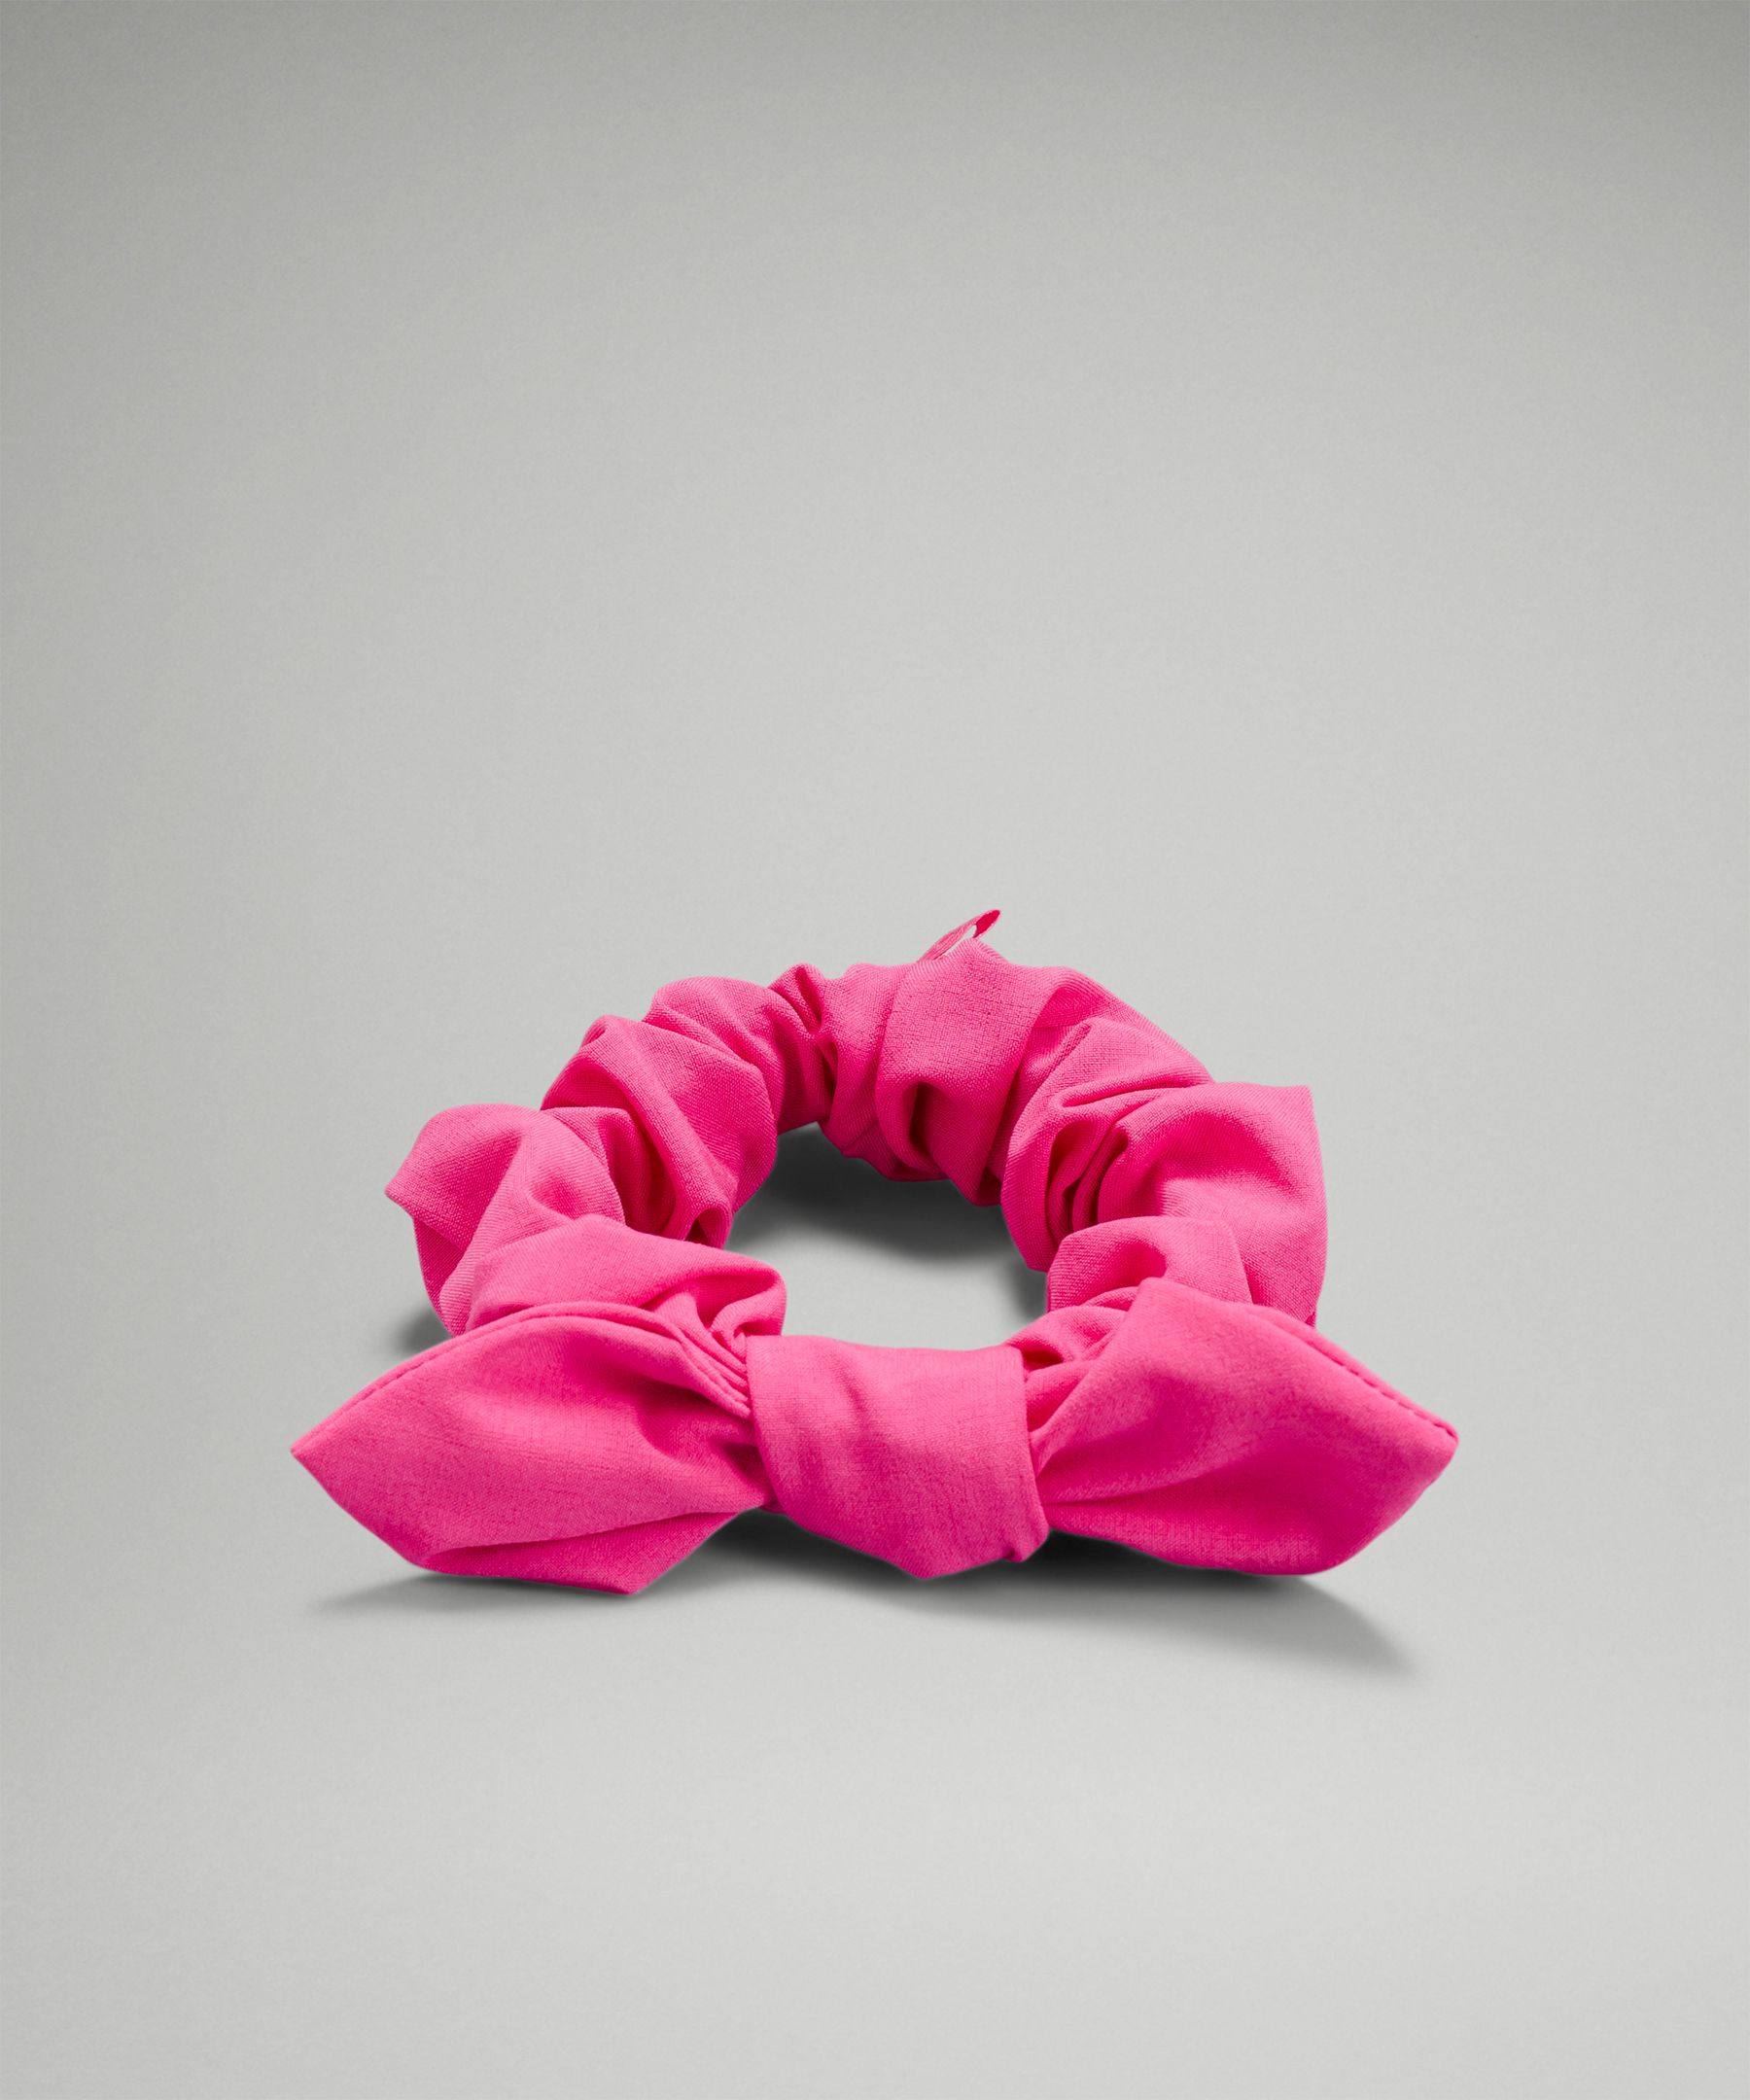 Lululemon Uplifting Bow Scrunchie In Sonic Pink